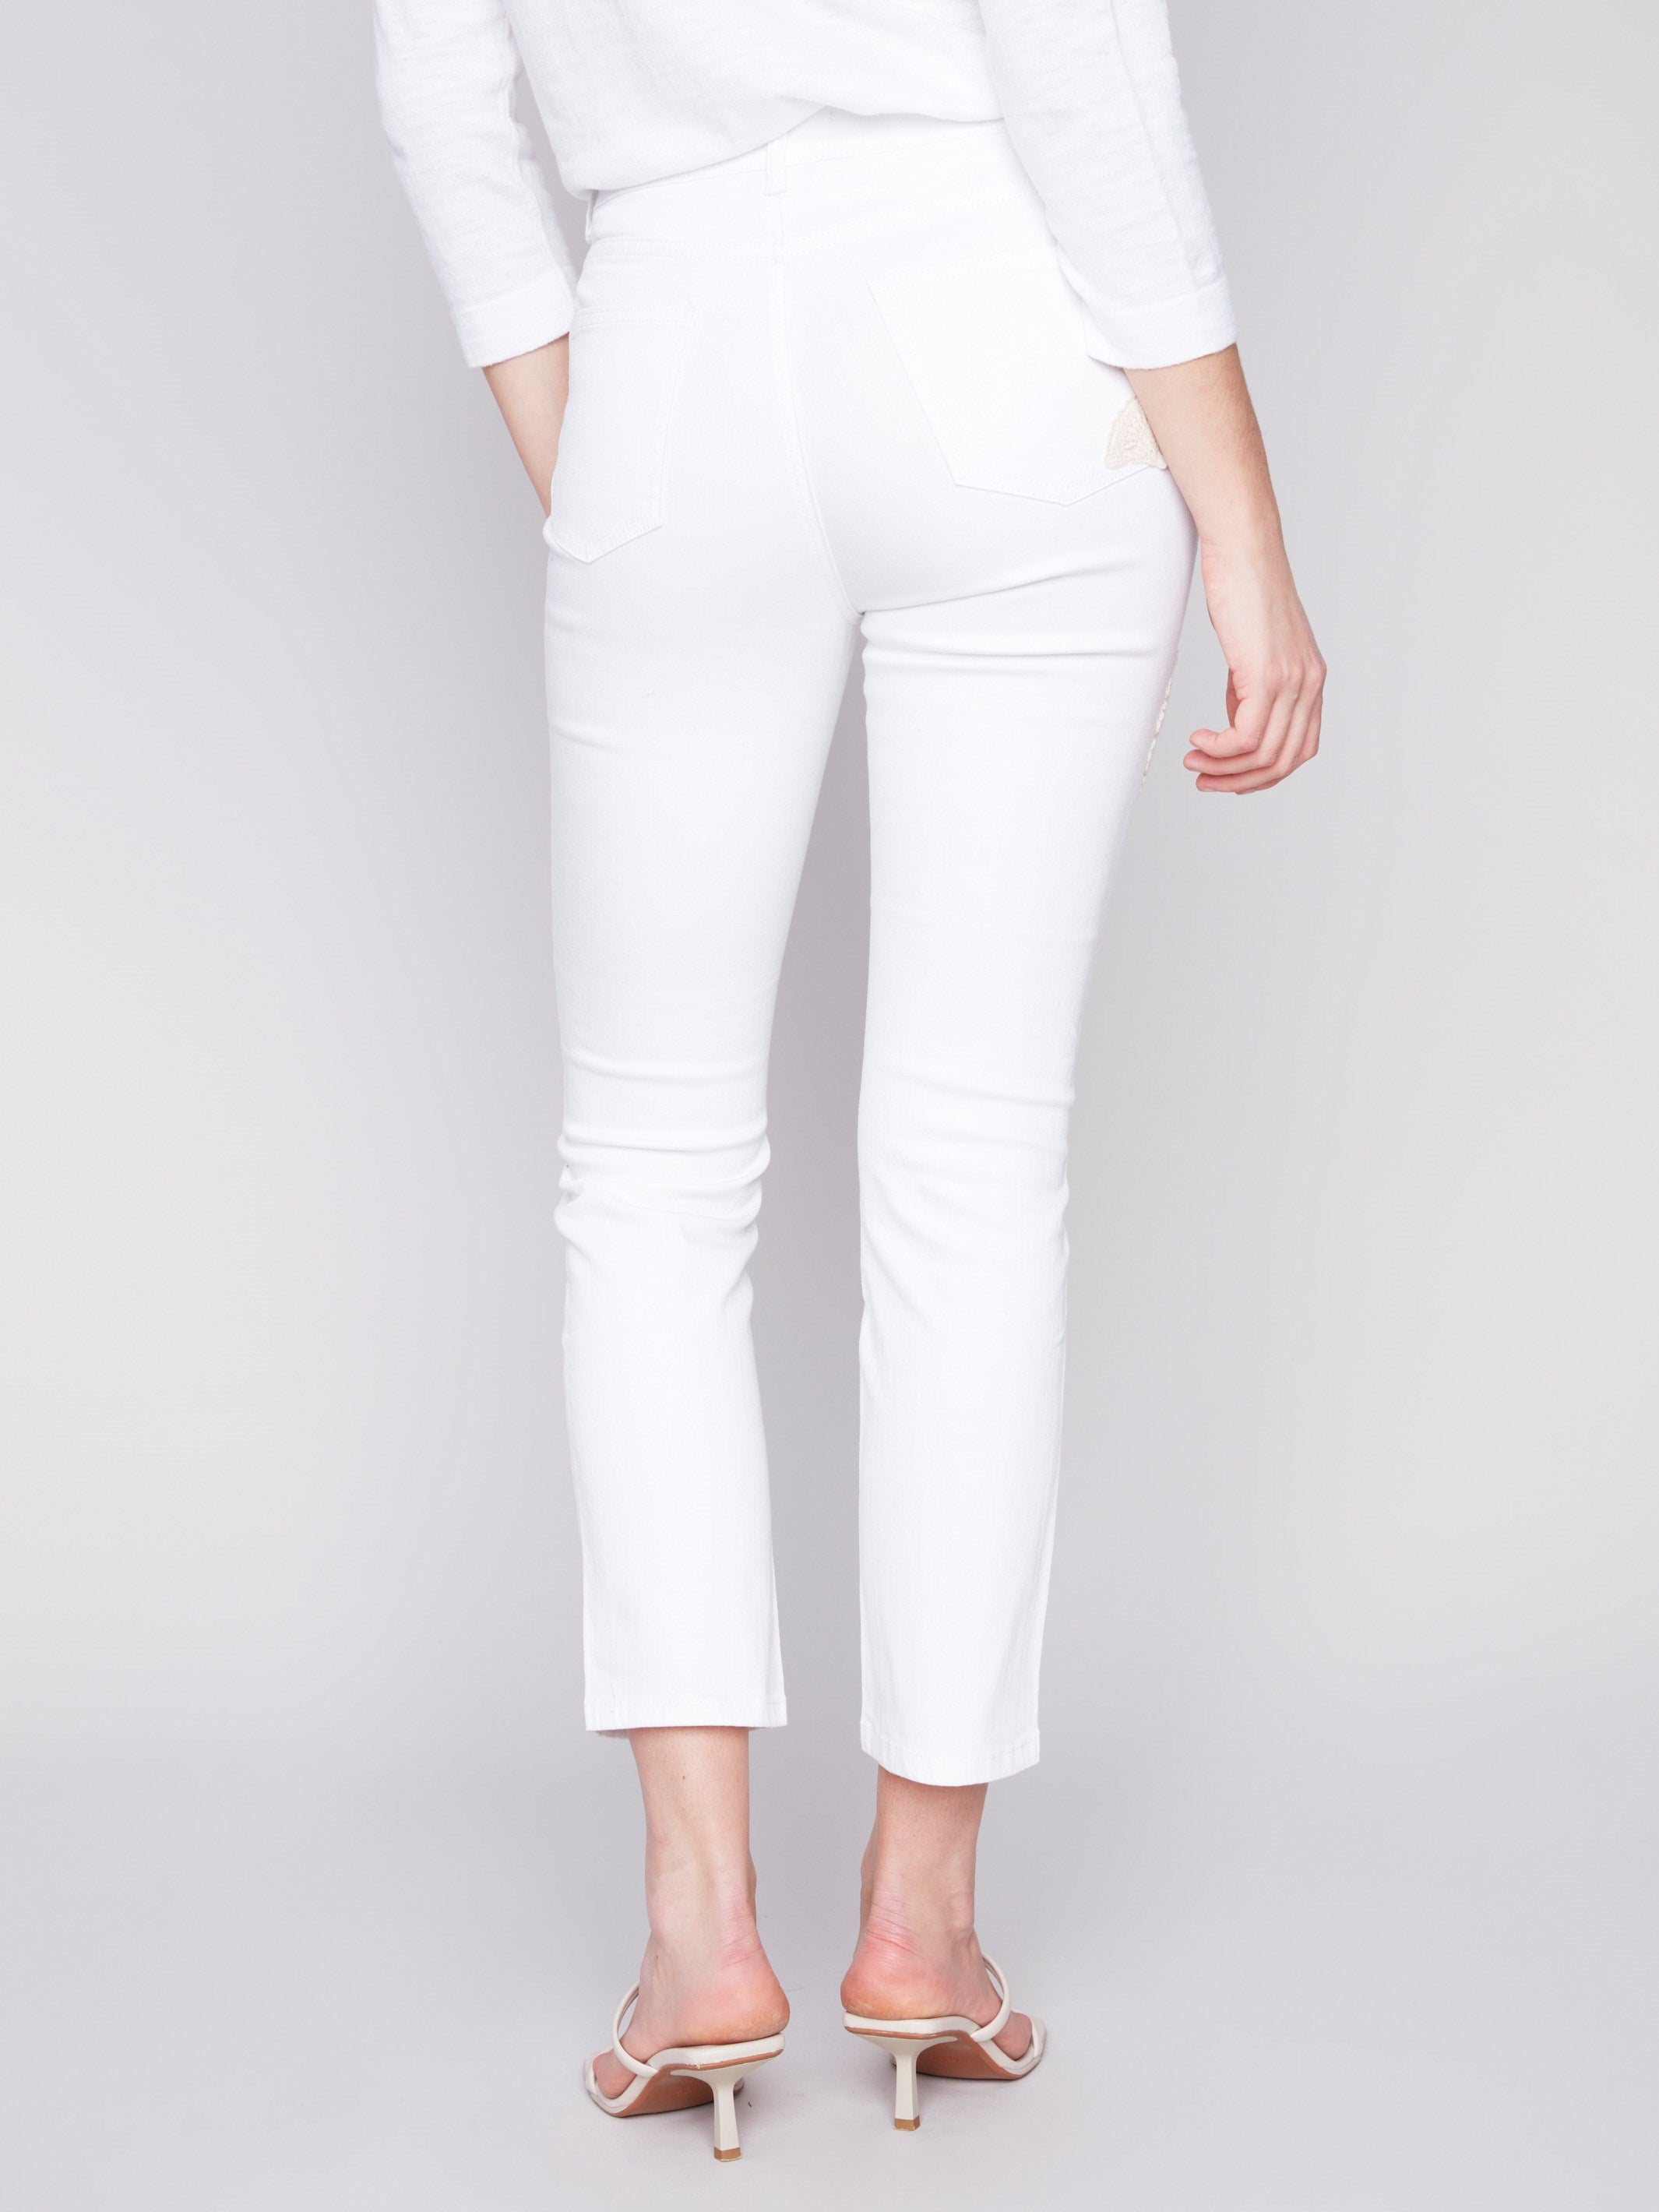 Jeans with Crochet Patch Details - White - Charlie B Collection Canada - Image 3